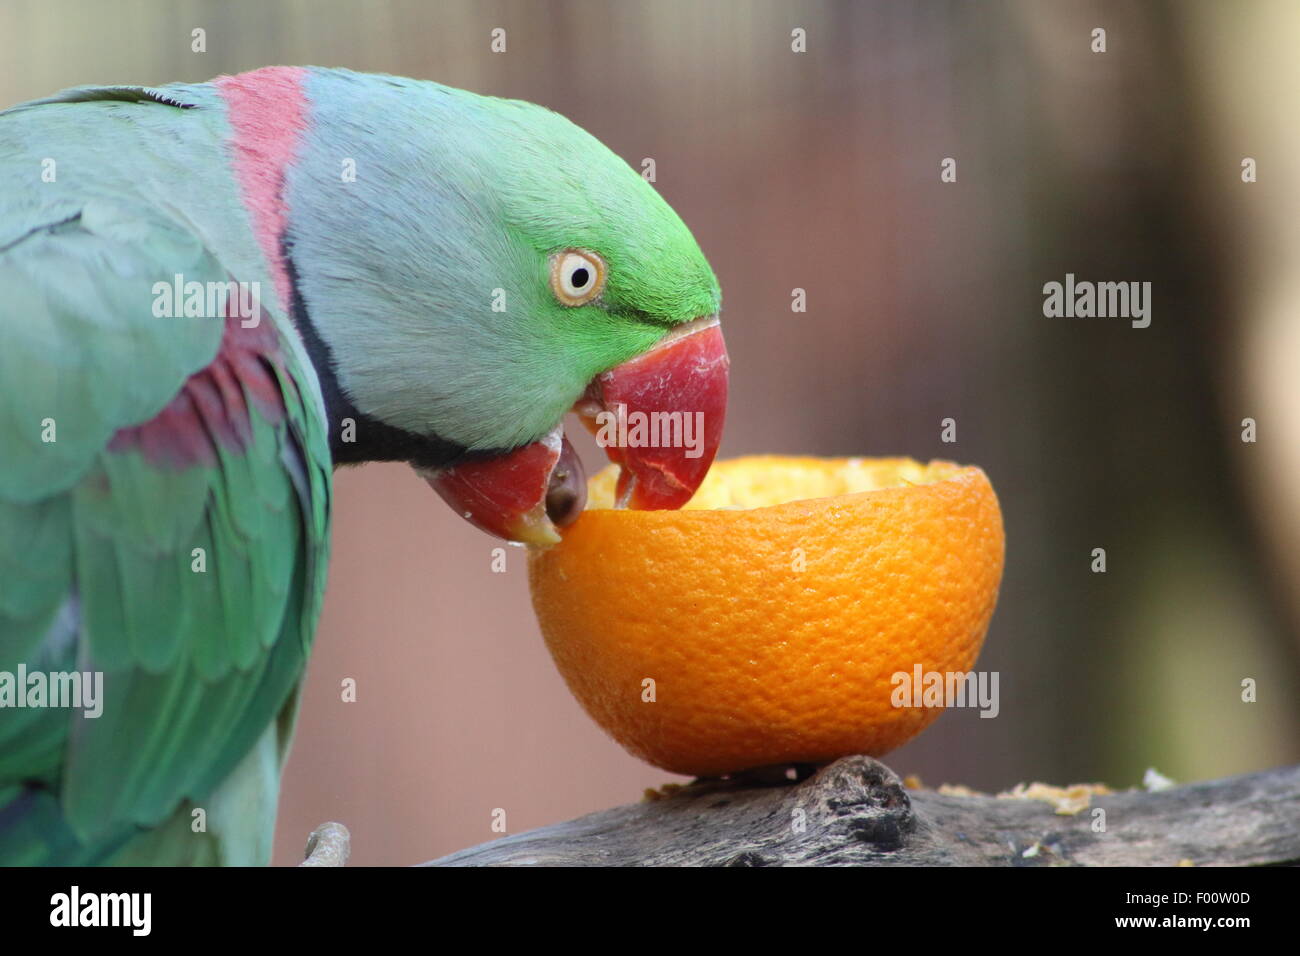 A landscape photograph of a parrot taking a bite from its fruit Stock Photo